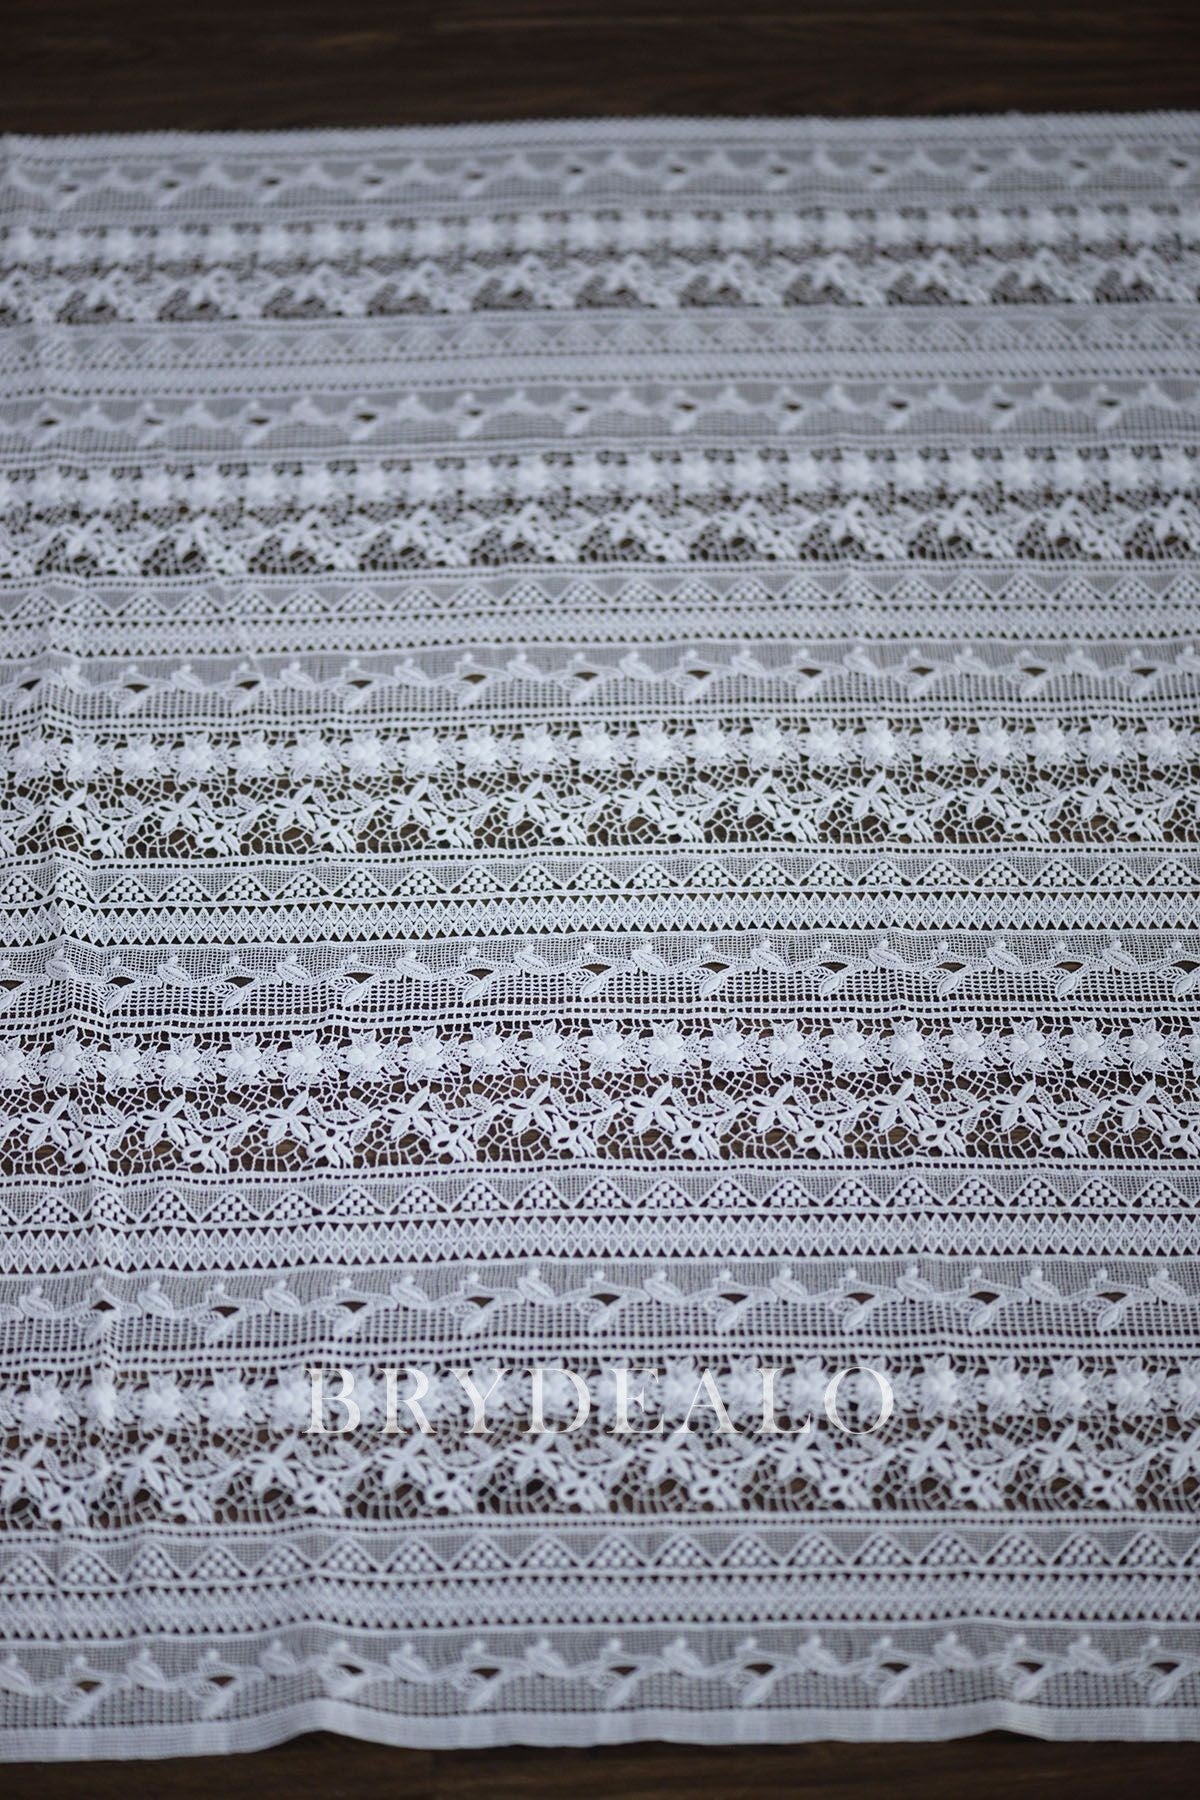 Delicate Patterned Bridal Crochet Lace Fabric by the yard